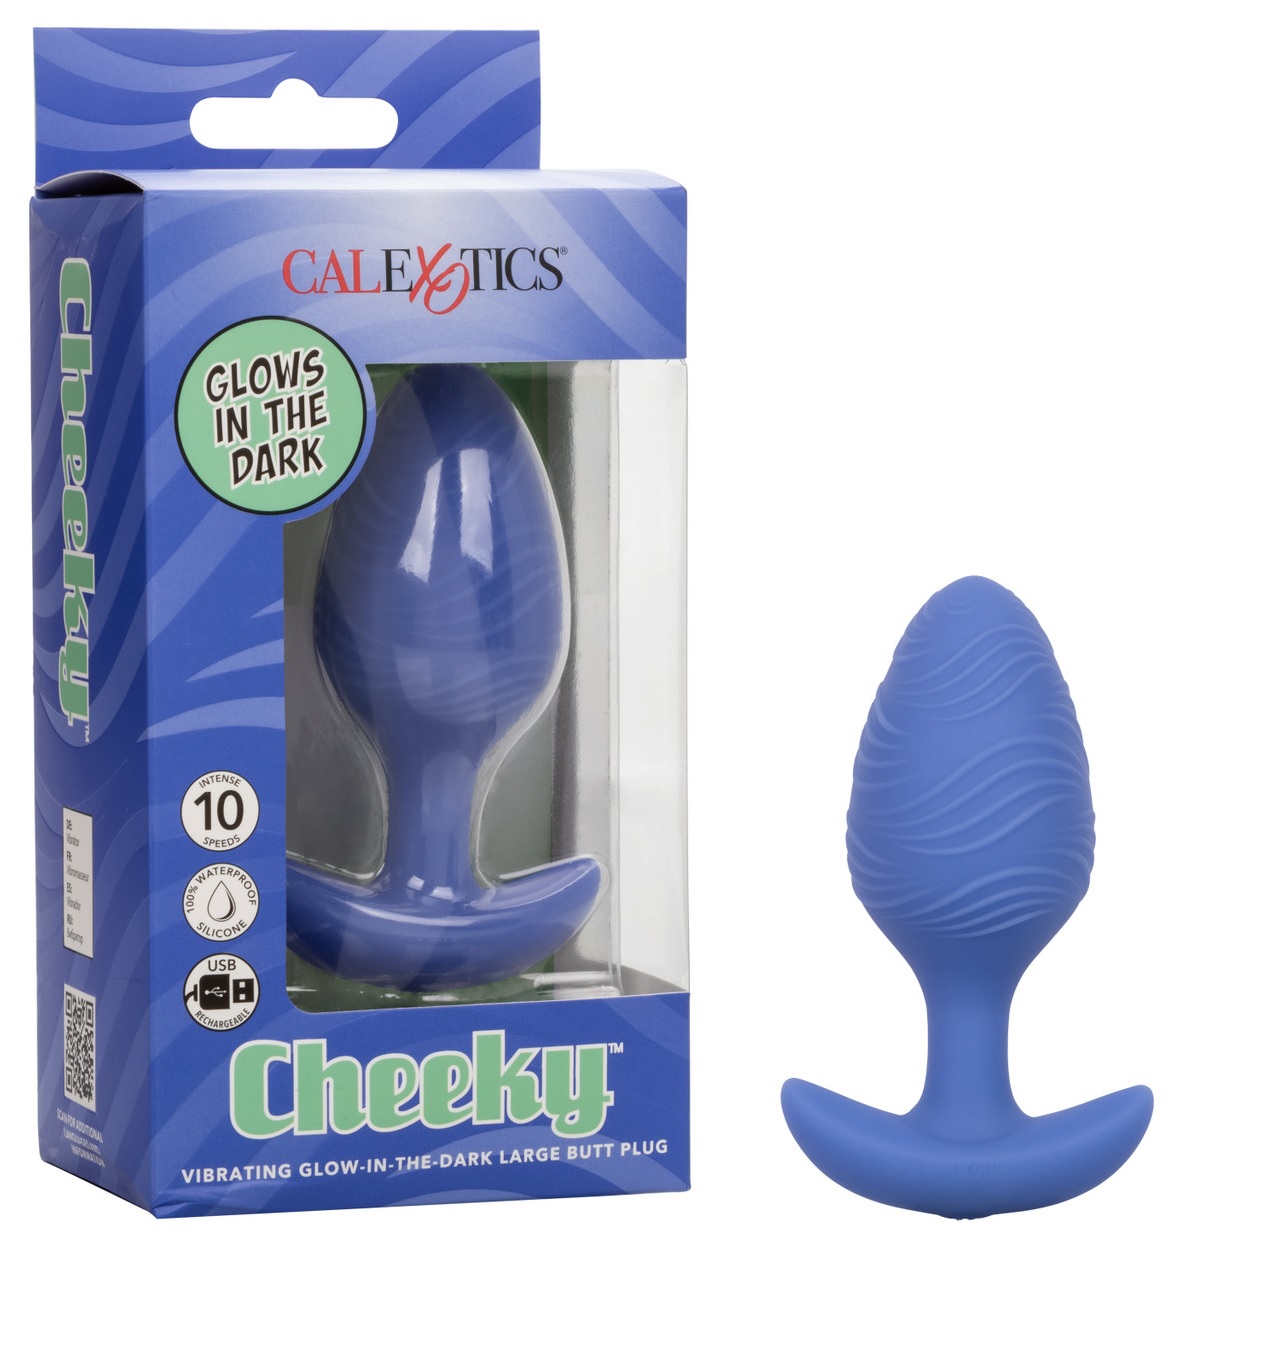 CHEEKY VIBRATING GLOW-IN-THE- DARK LARGE BUTT PLUG